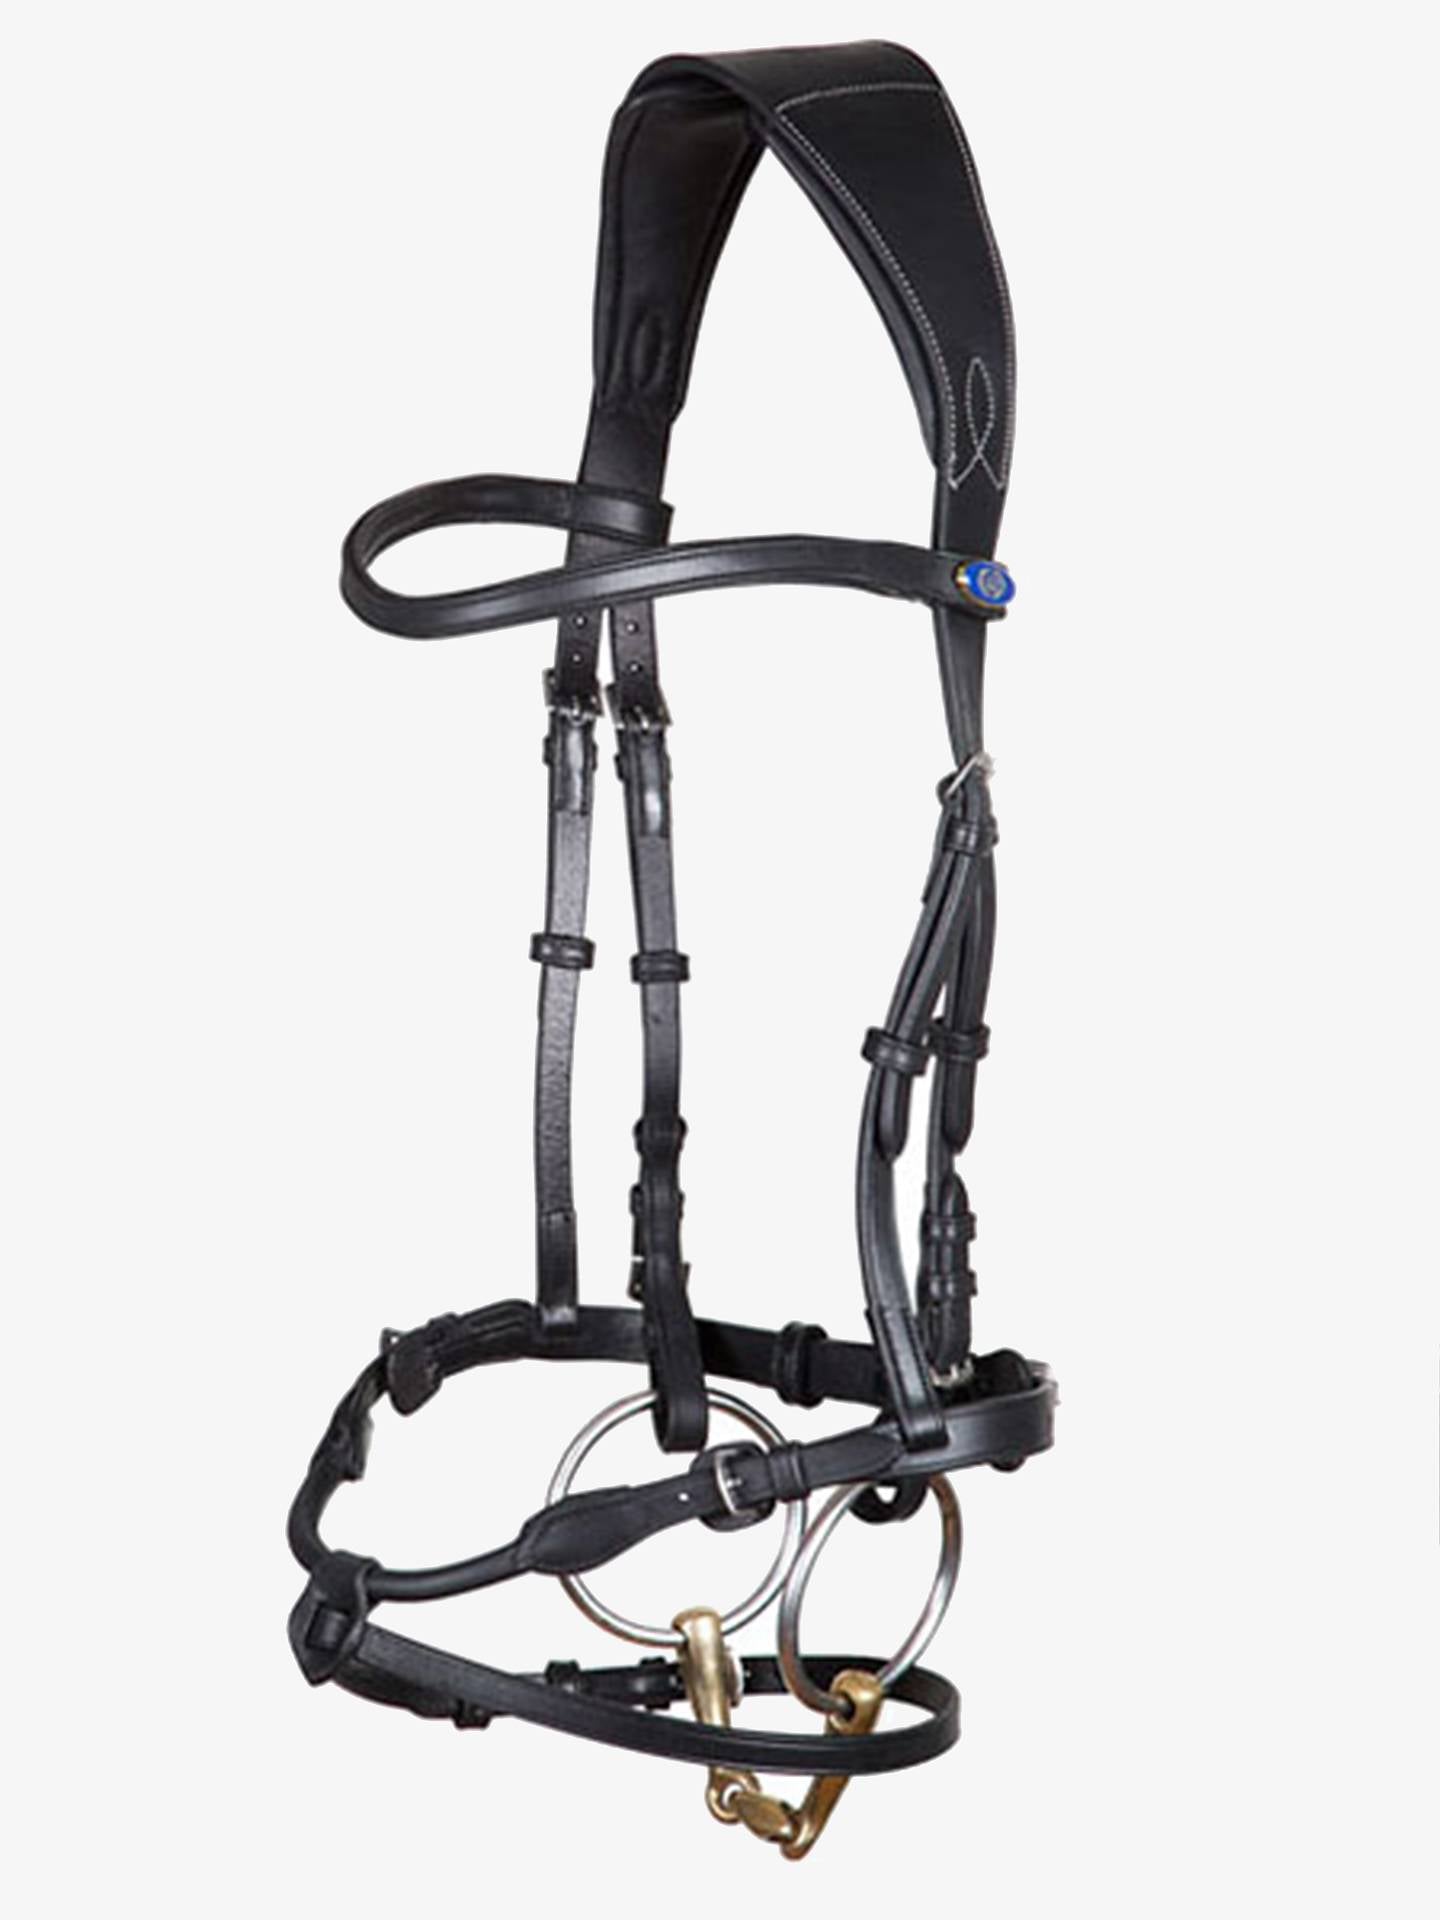 The fit of the bridle is the most important thing for us at PS of Sweden. Together with one of the best showjumpers in the world, Henrik von Eckermann, we have designed this unique bridle with amazing features that you and your horse will love!